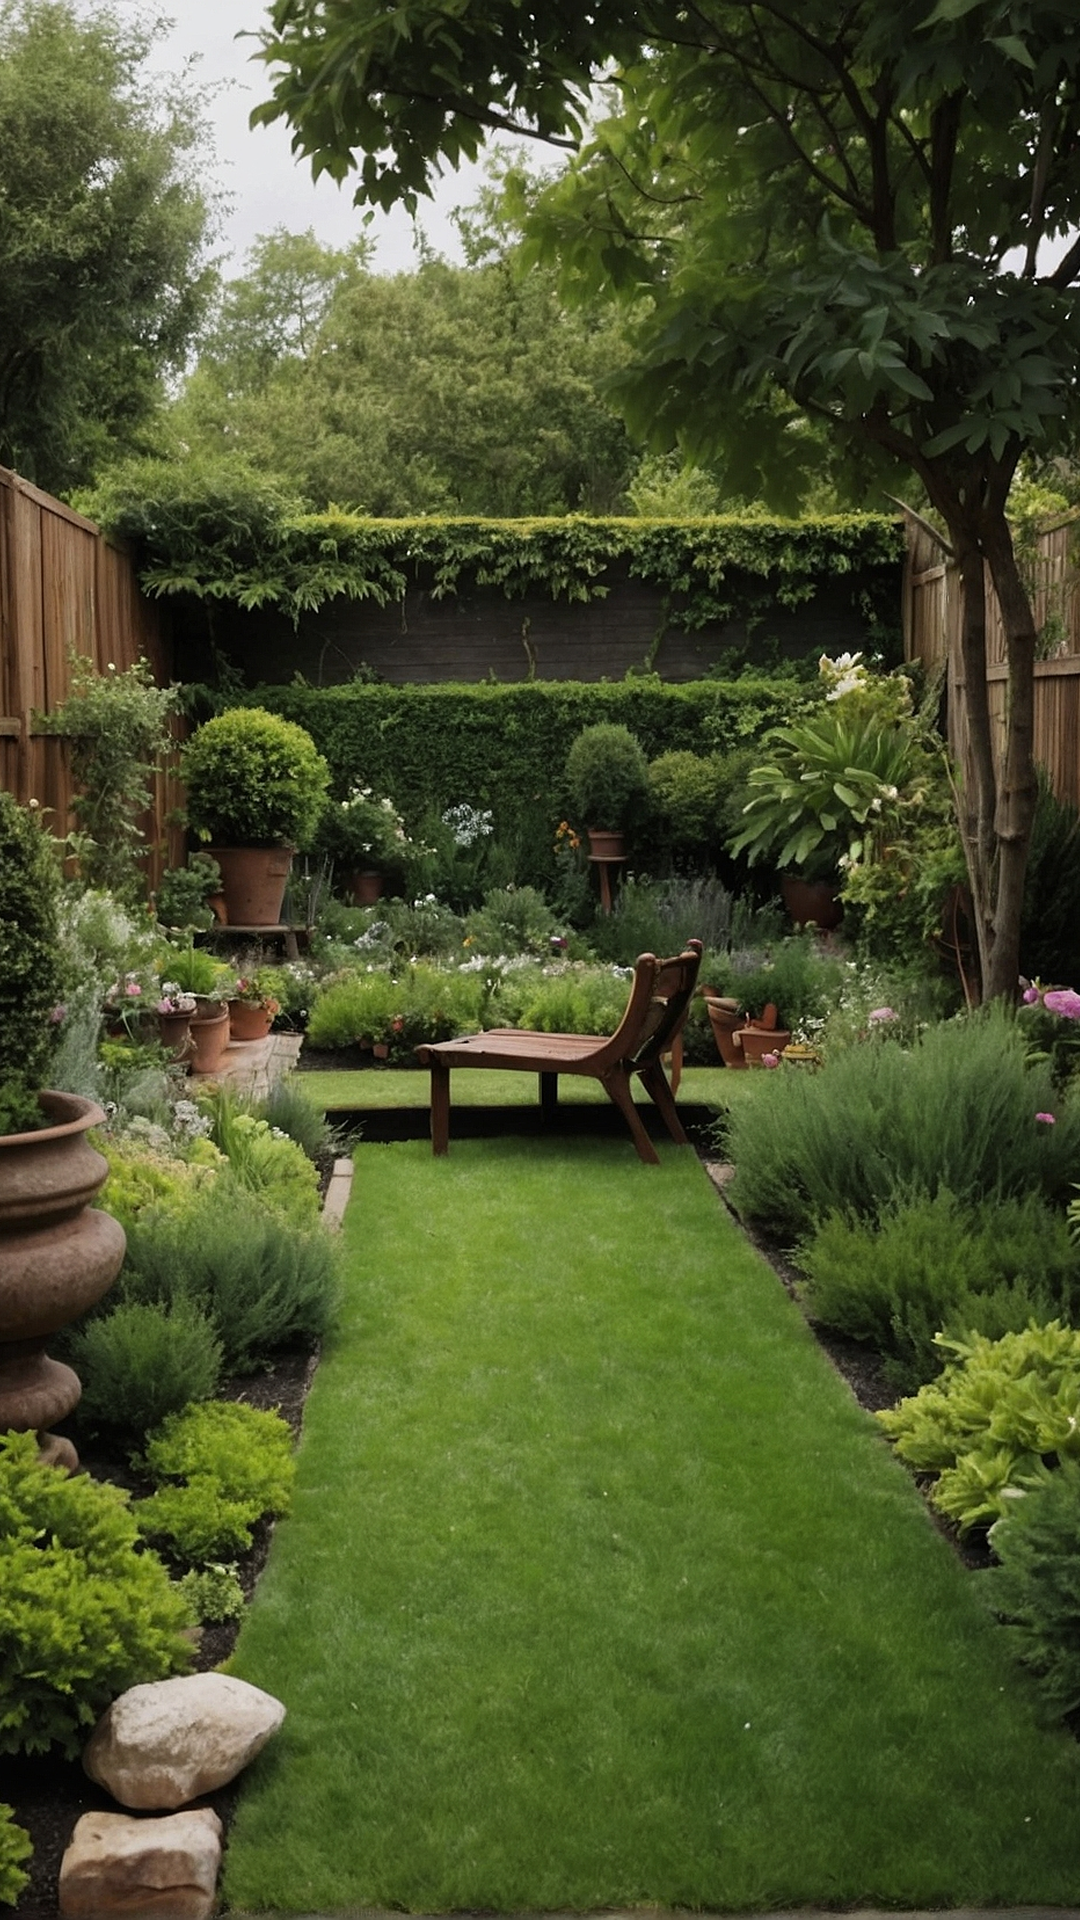 Small Garden Layouts: Form, Function and Beauty in Tiny Spaces